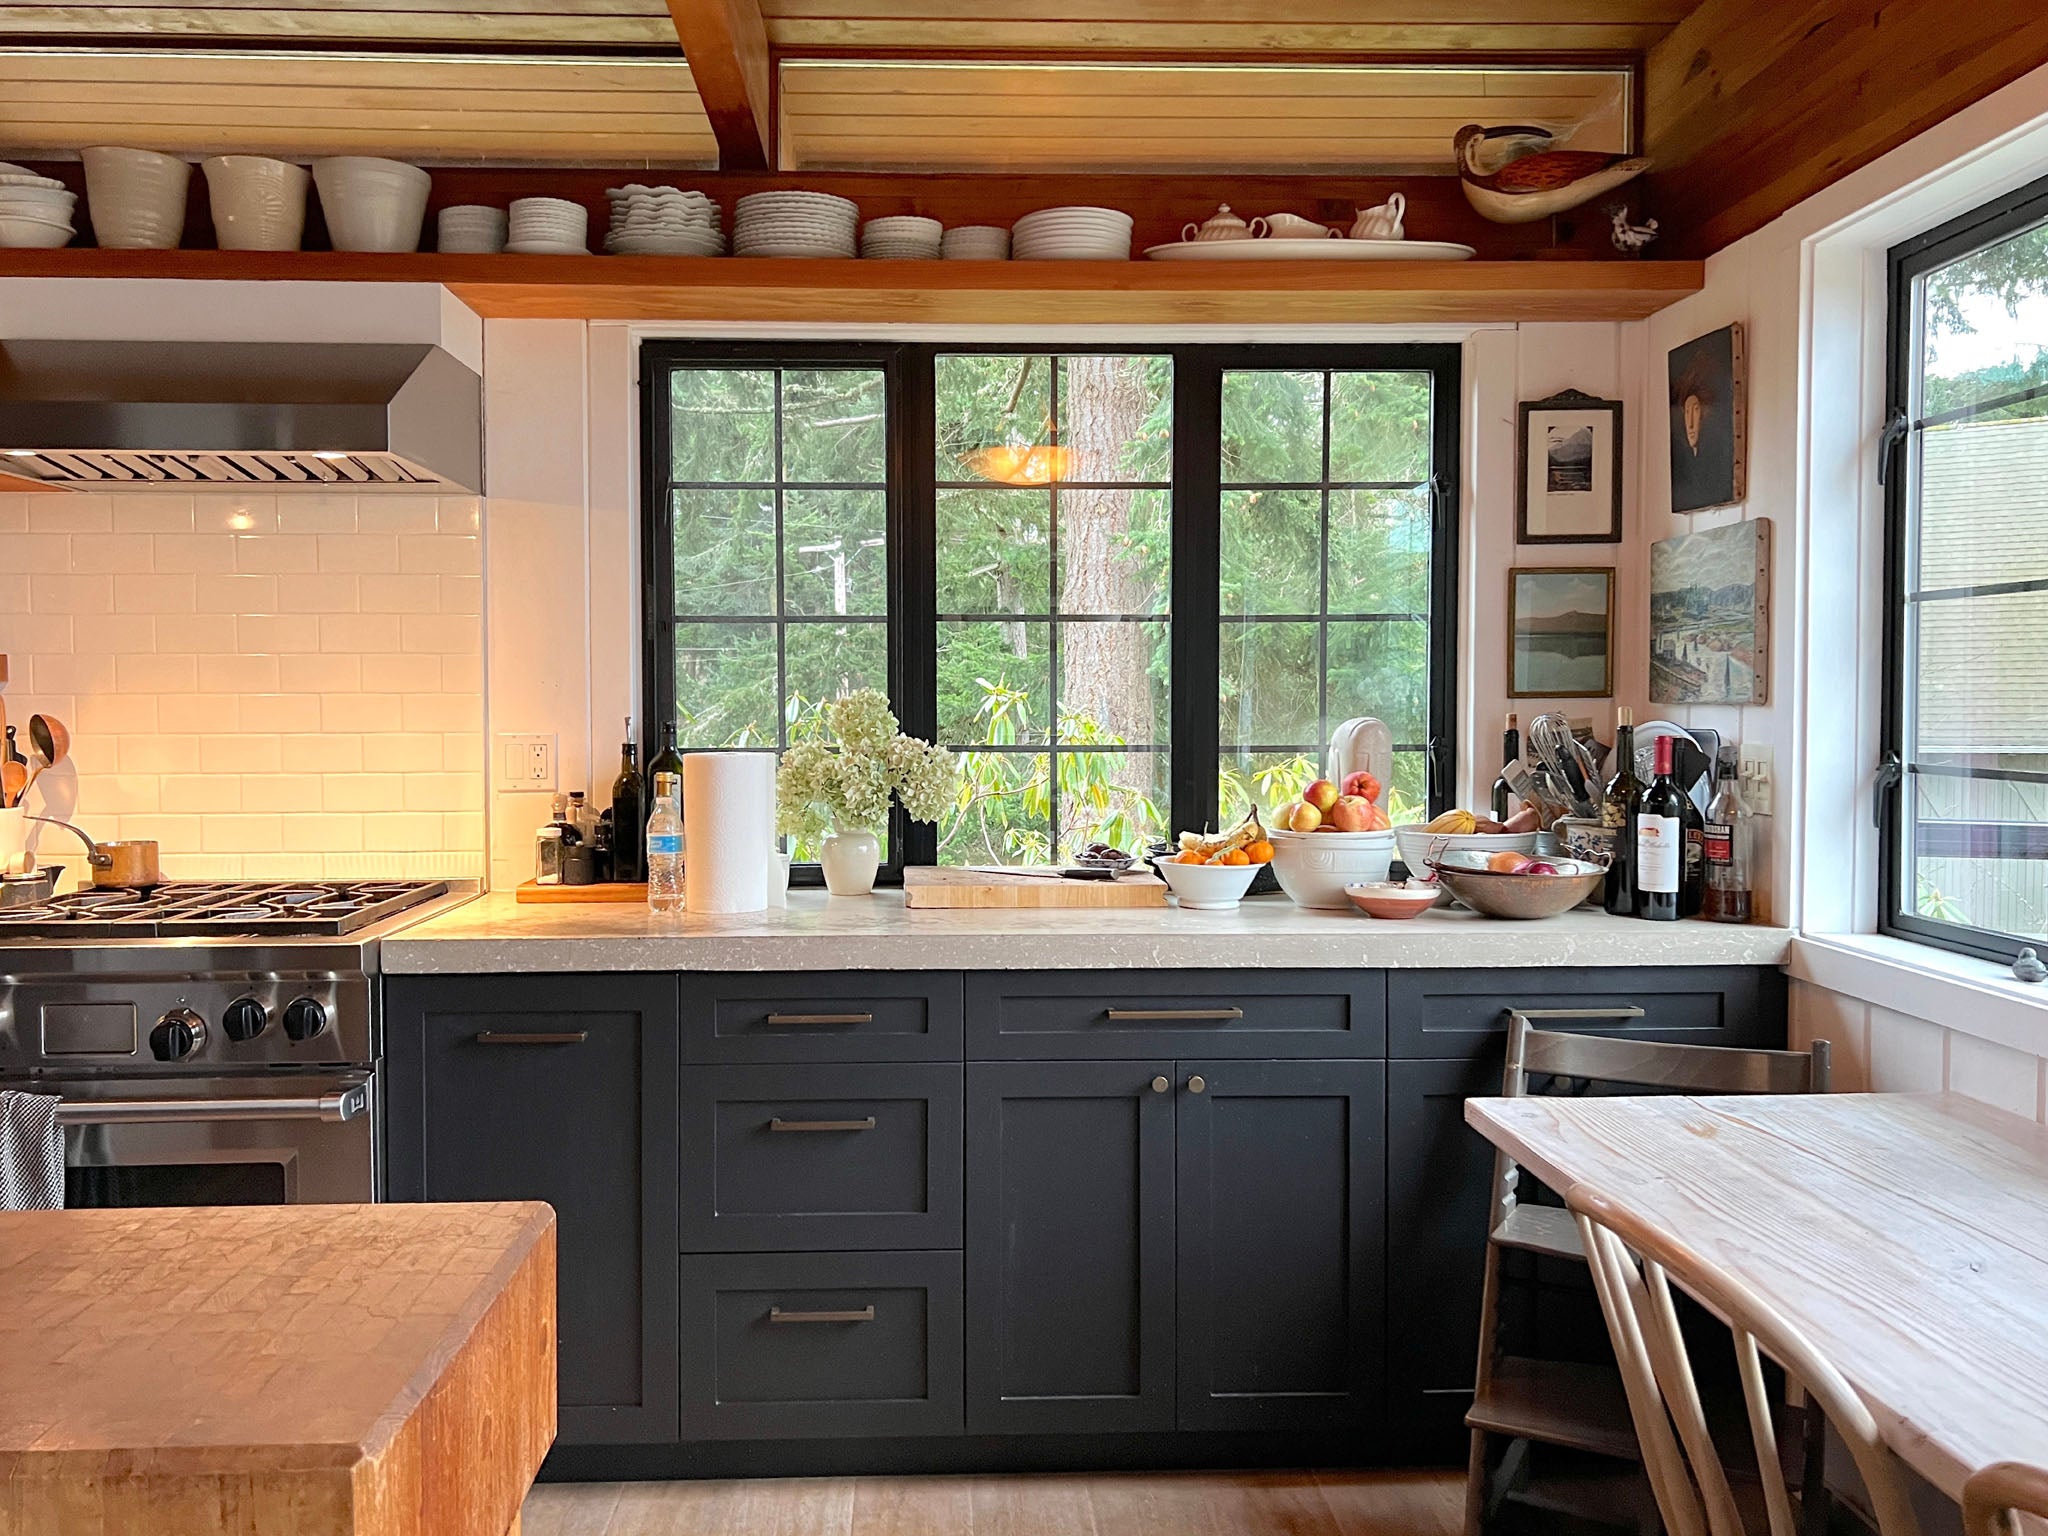 The kitchen in the home of fabric designer Marcia Derse